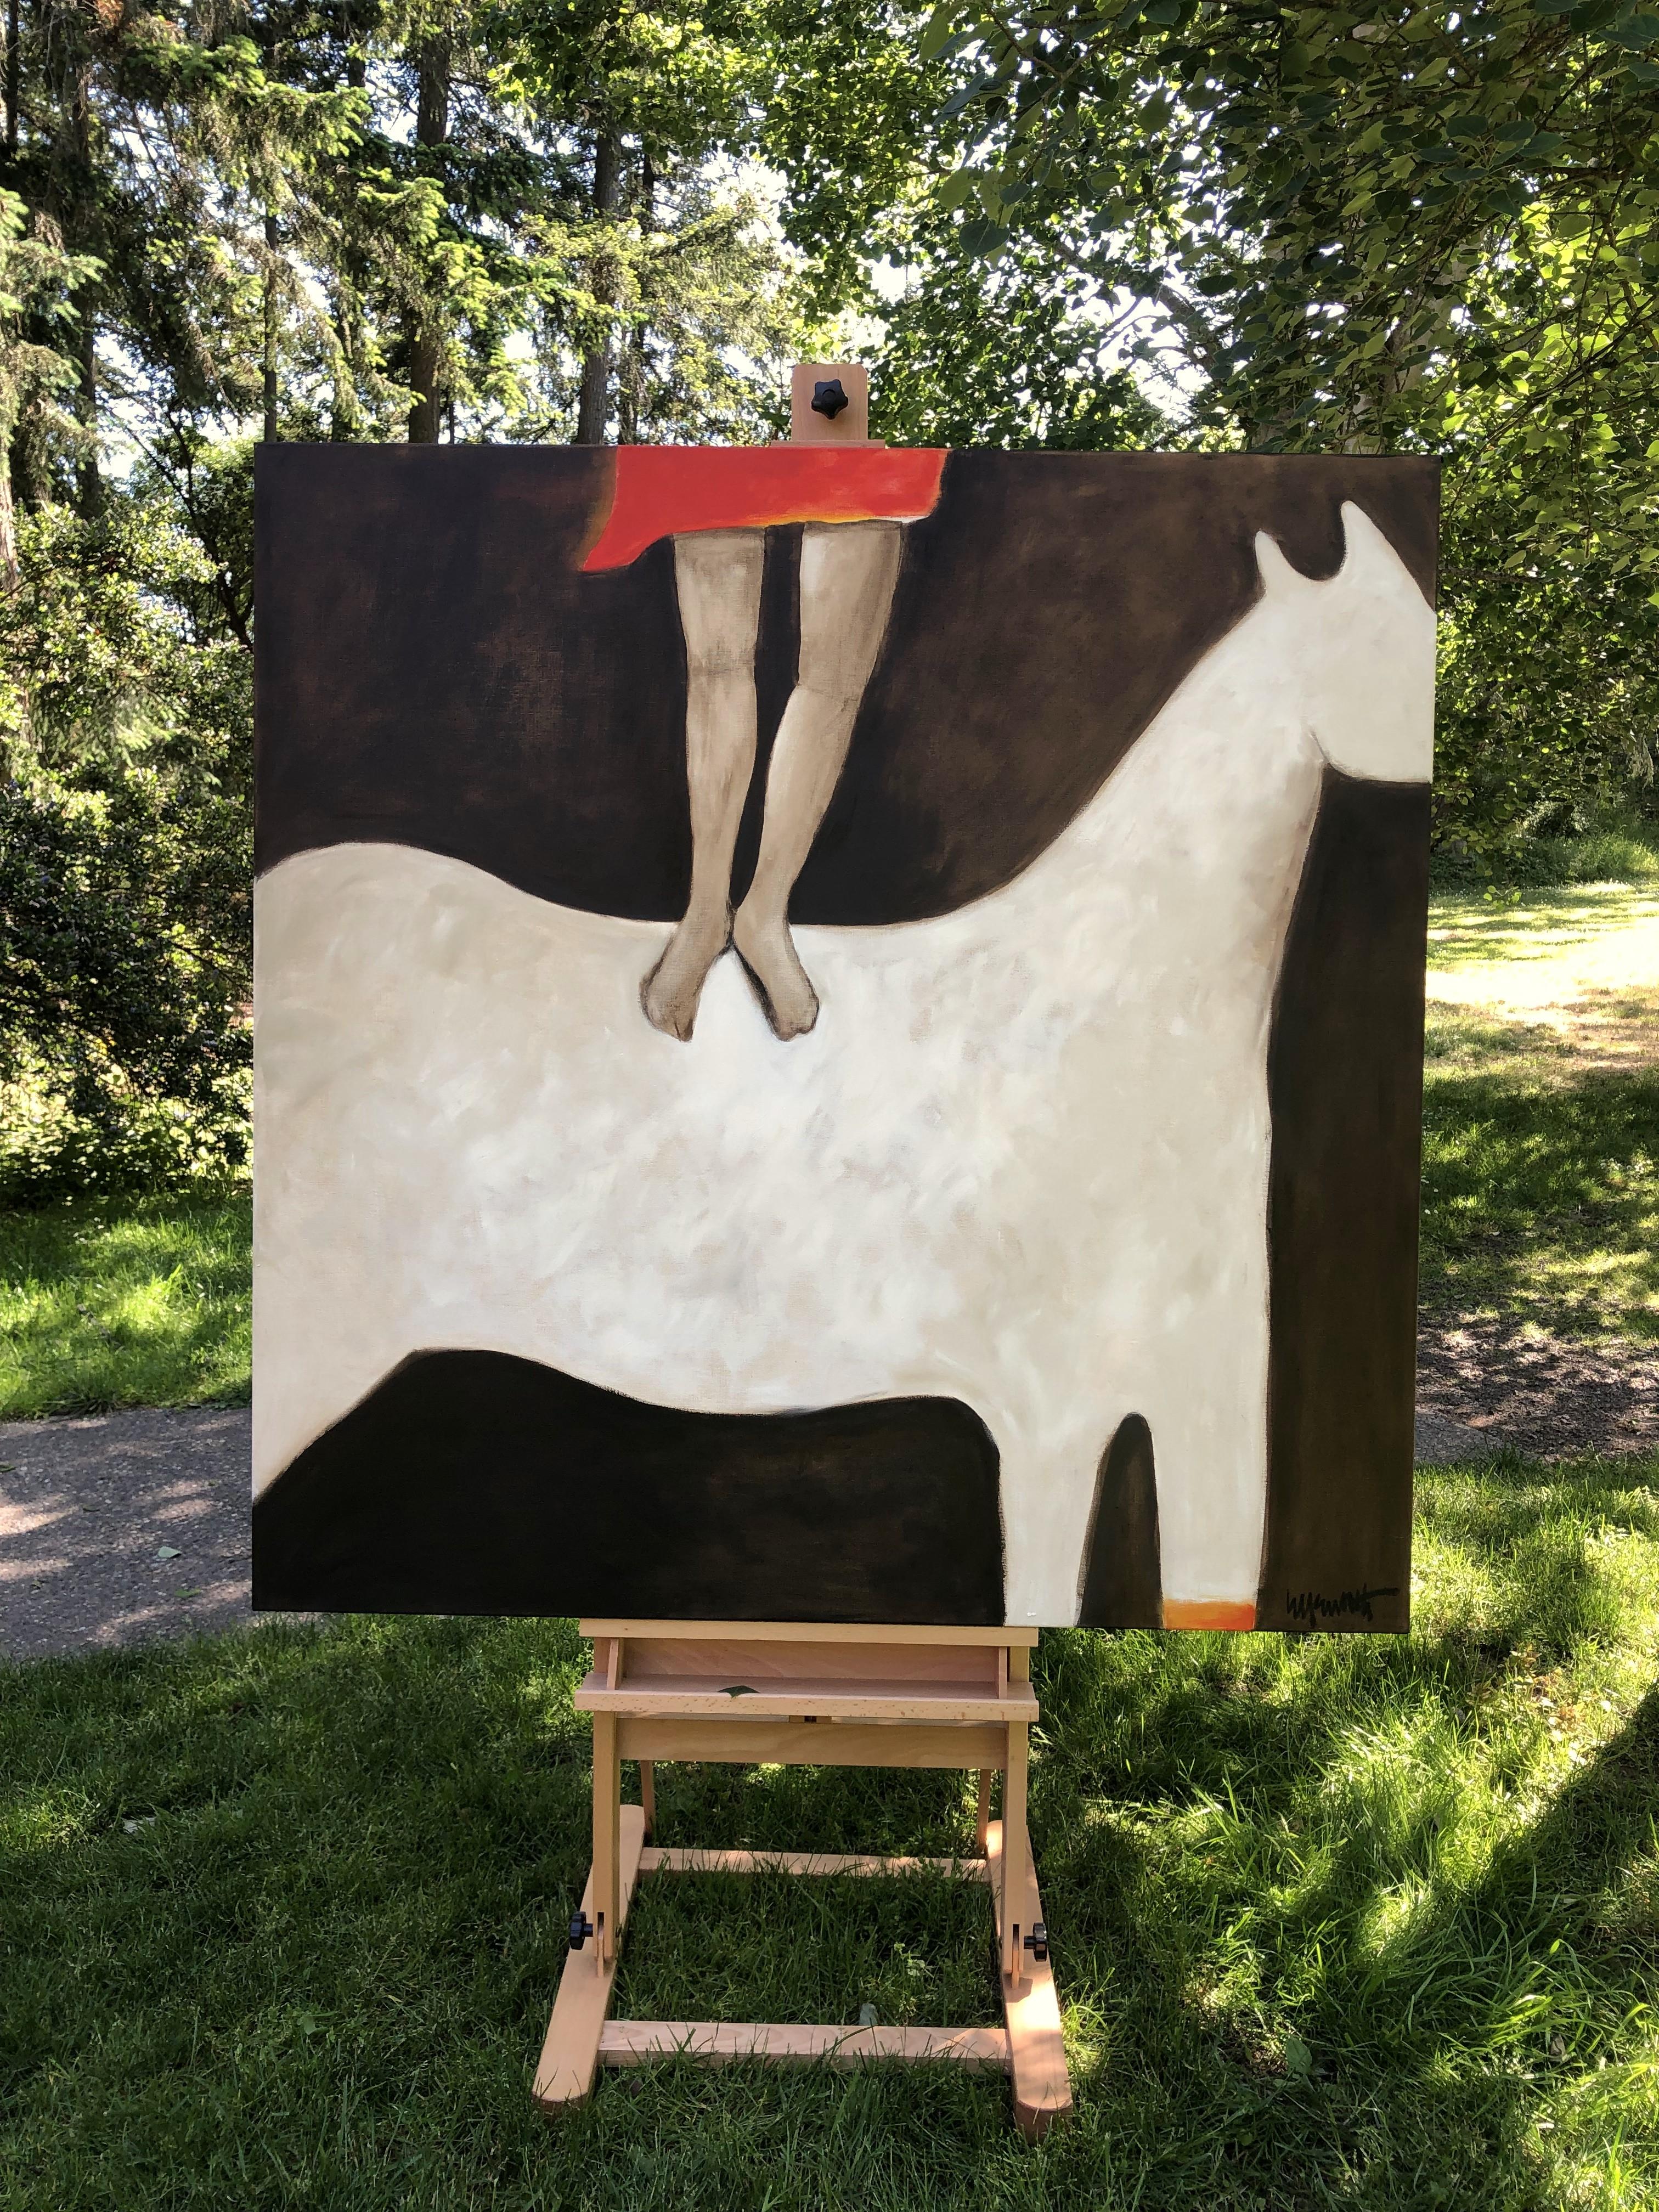 <p>Artist Comments<br>Artist Jaime Ellsworth depicts a sturdy white stallion with its face out of frame. A girl with a red skirtâ€”also obscured from perspectiveâ€”stands on its back. She appears to delicately dance and finds balance on top of the